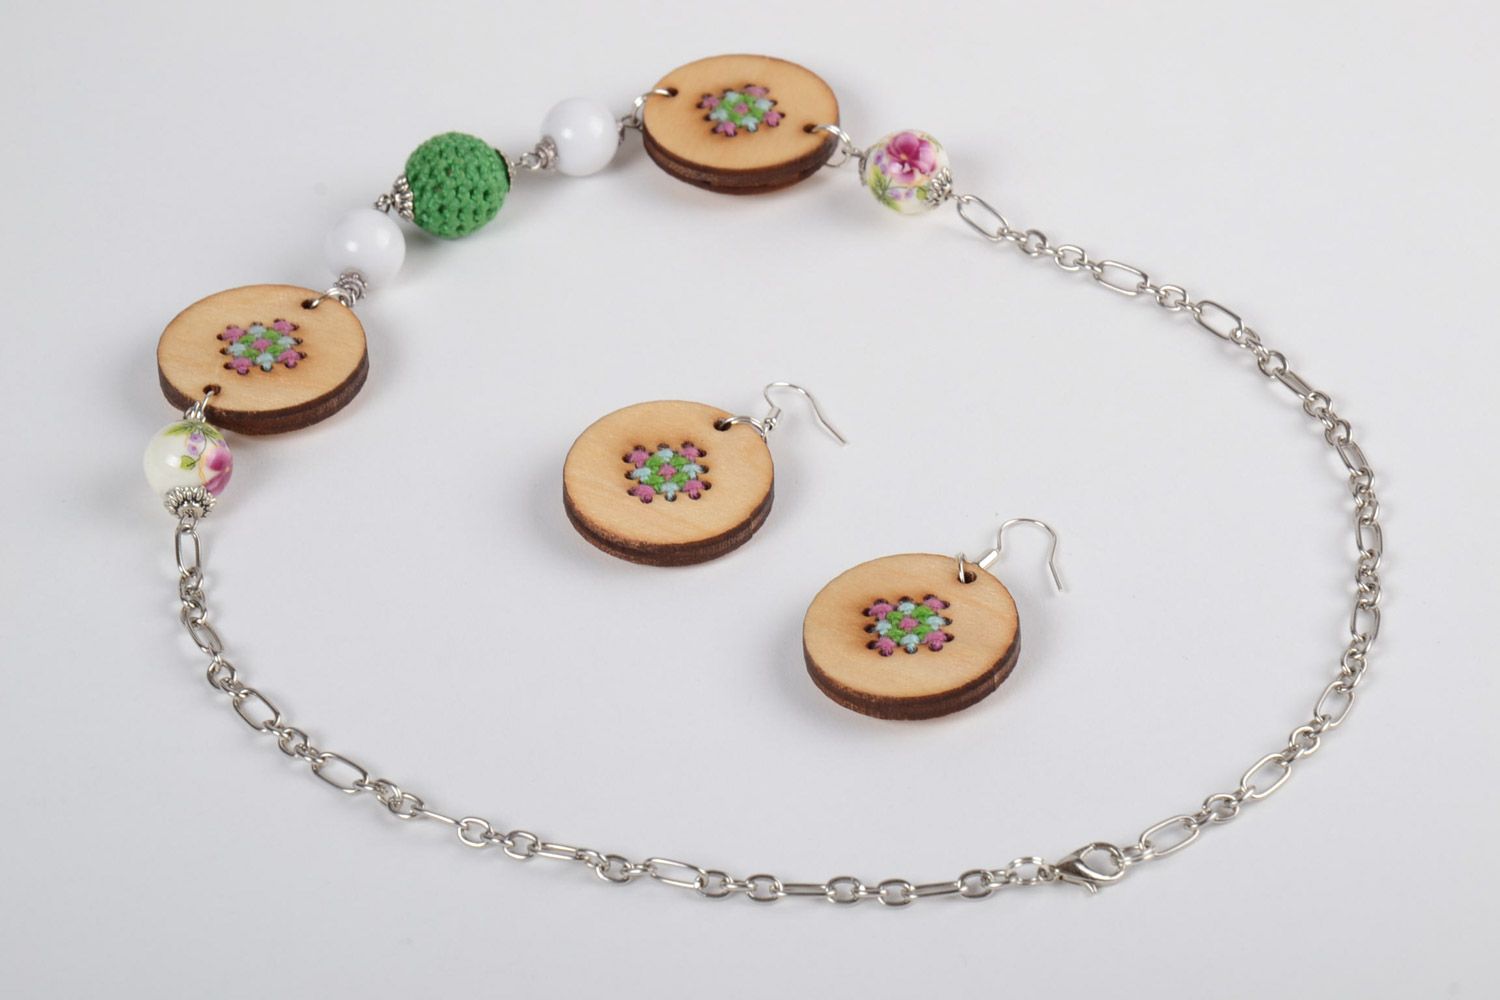 Handmade jewelery set made of plywood necklace and earrings with cross-stitch embroidery photo 4